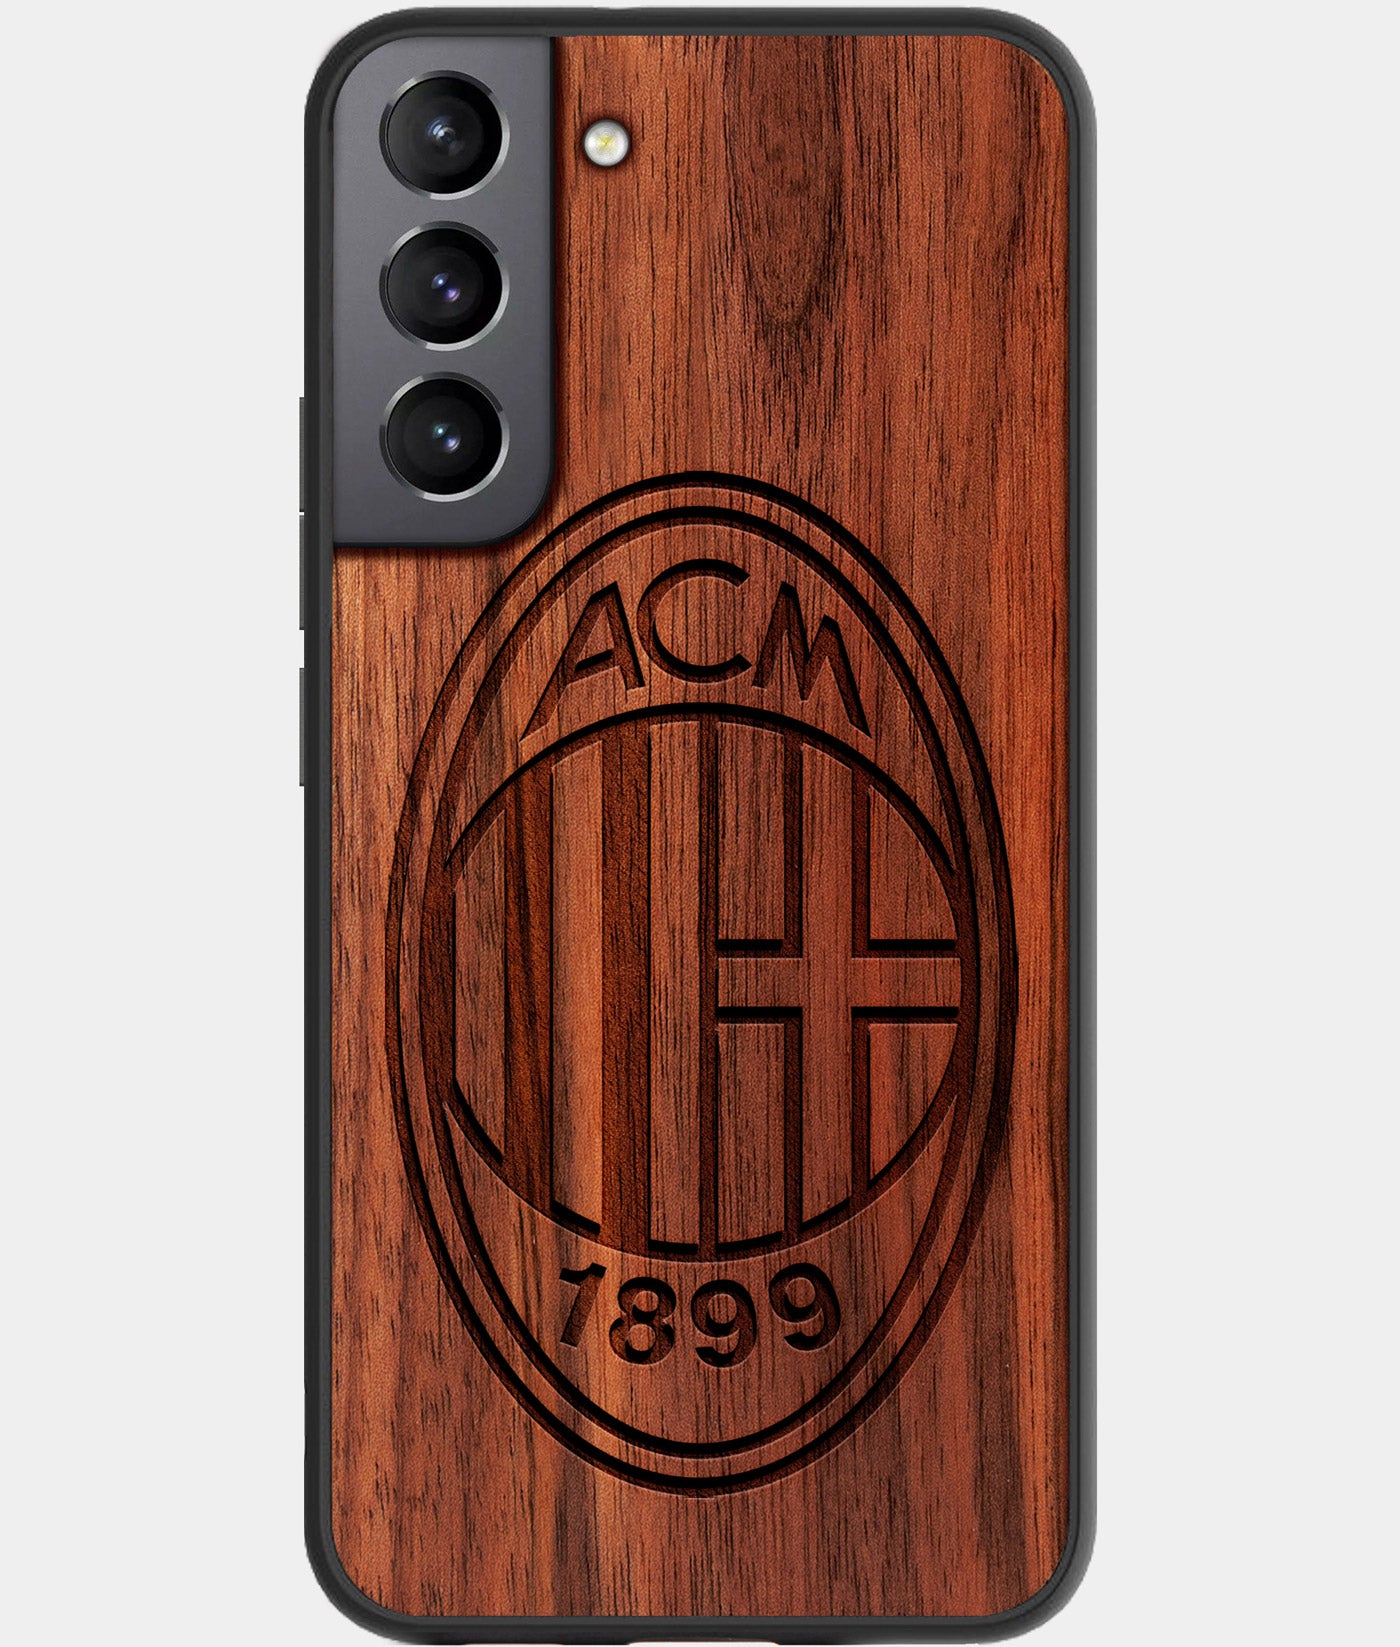 Best Wood A.C. Milan Samsung Galaxy S22 Case - Custom Engraved Cover - Engraved In Nature